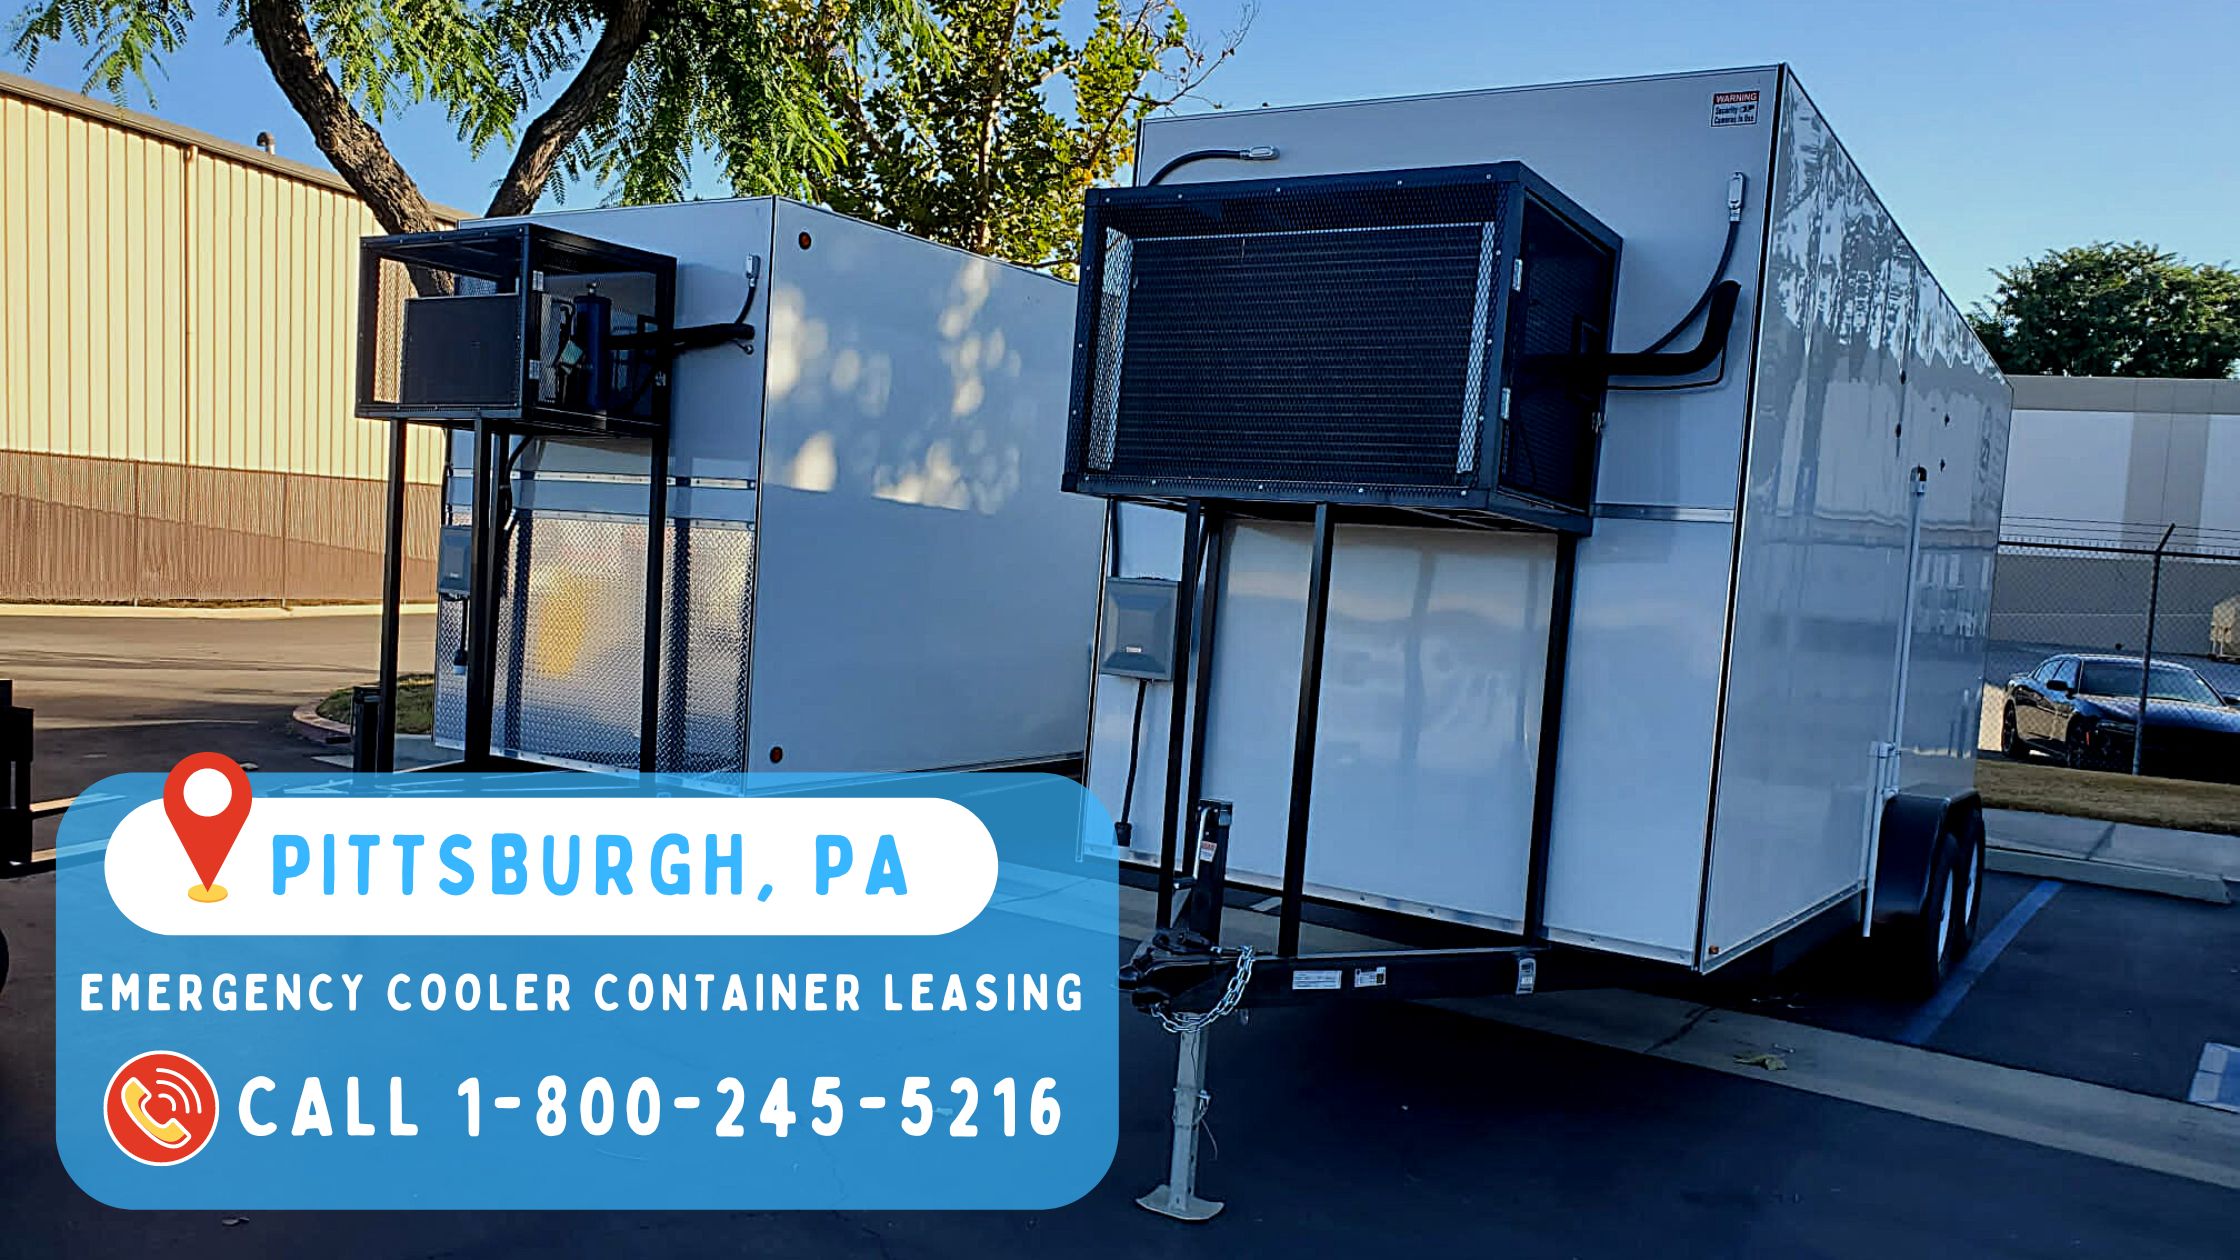 Emergency Cooler Container Leasing in Pittsburgh